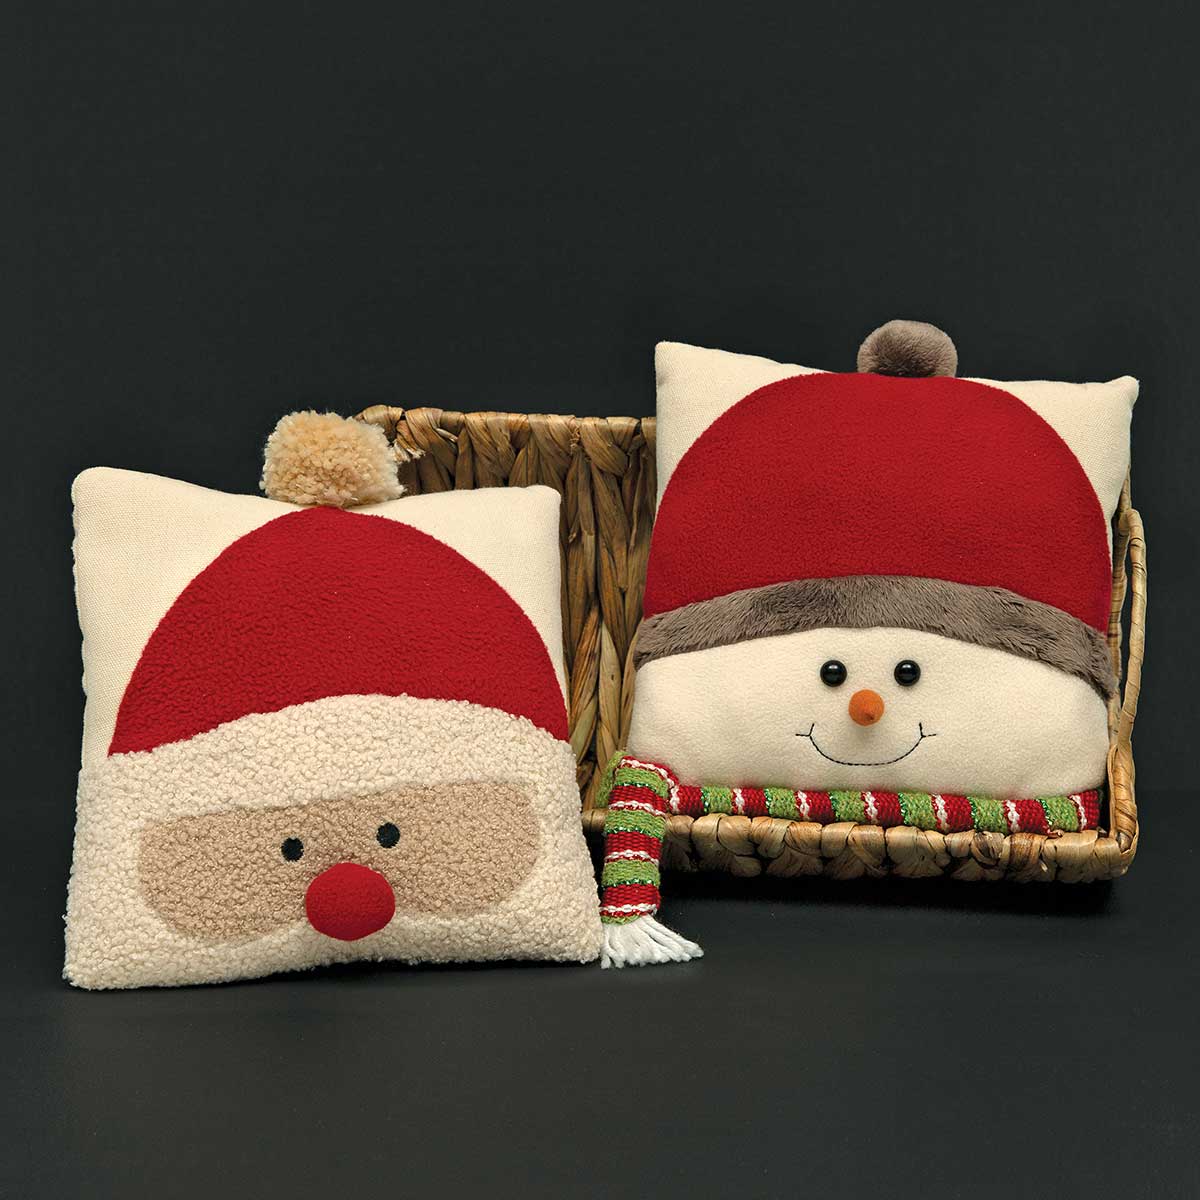 SNOWMAN FACE PILLOW CREAM/RED/GREEN WITH POM-POM